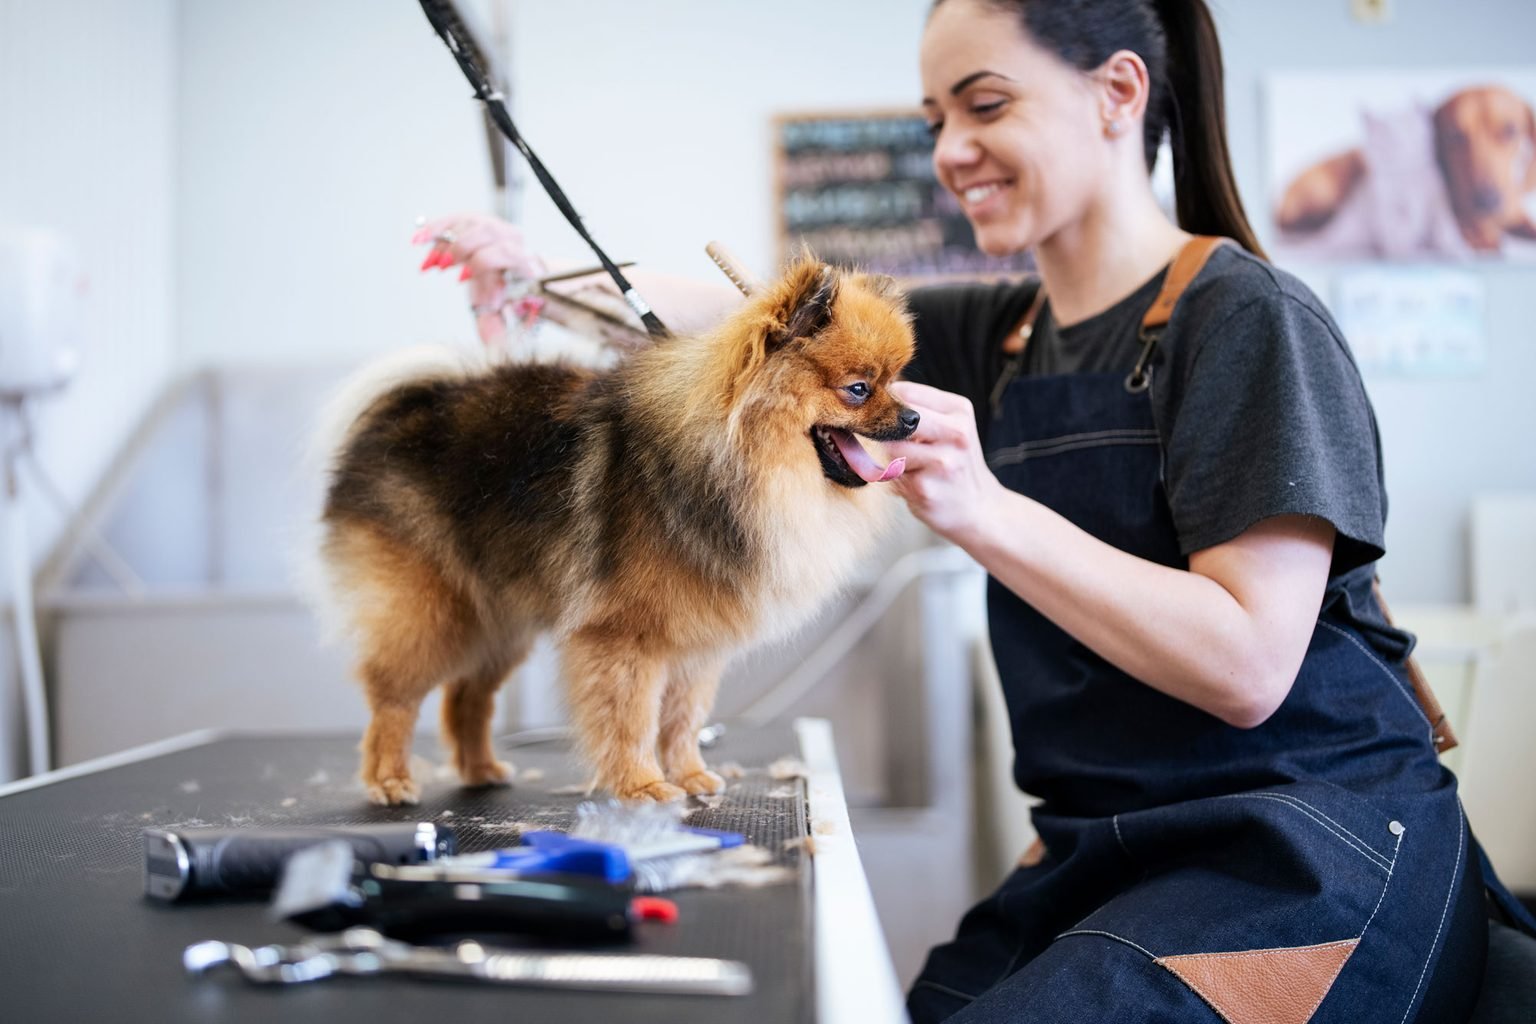 Wash n' Woo: The Groomery for Pampered Pets